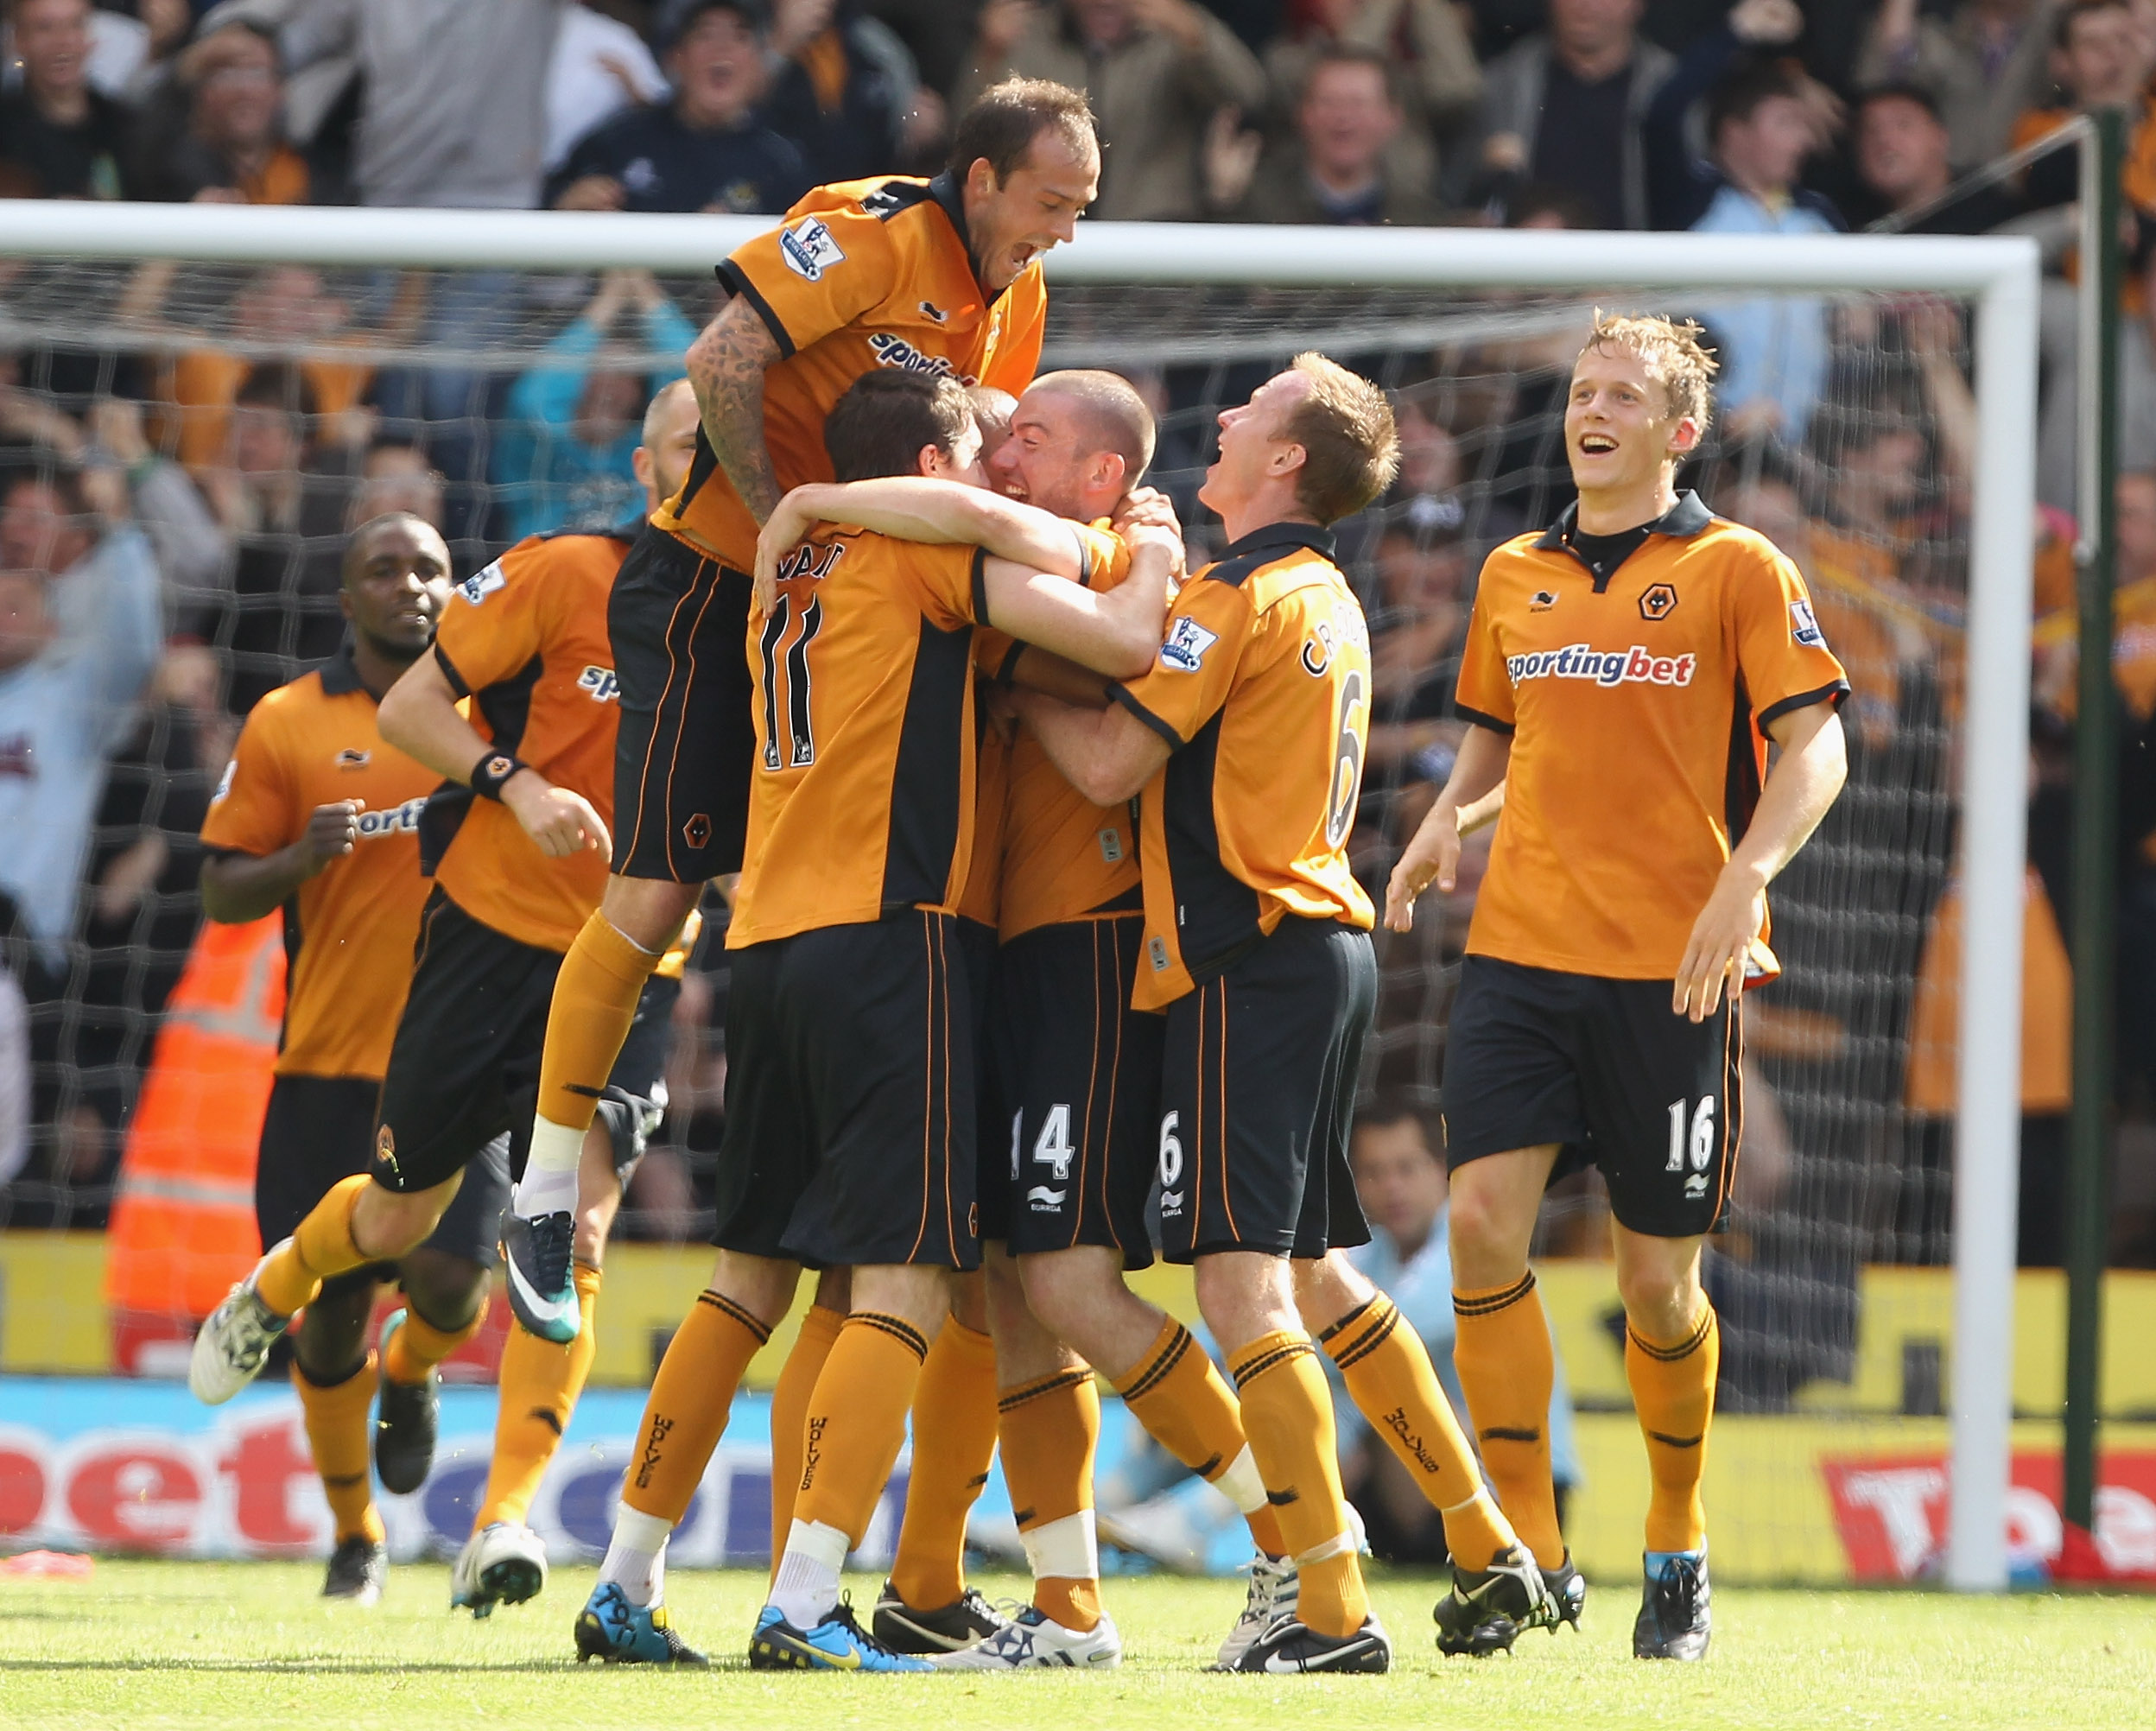 WOLVERHAMPTON, ENGLAND - AUGUST 14:  David Jones of Wolverhampton Wanderers celebrates after scoring the first goal during the Barclays Premier League match between Wolverhampton Wanderers and Stoke City at Molineux on August 14, 2010 in Wolverhampton, En